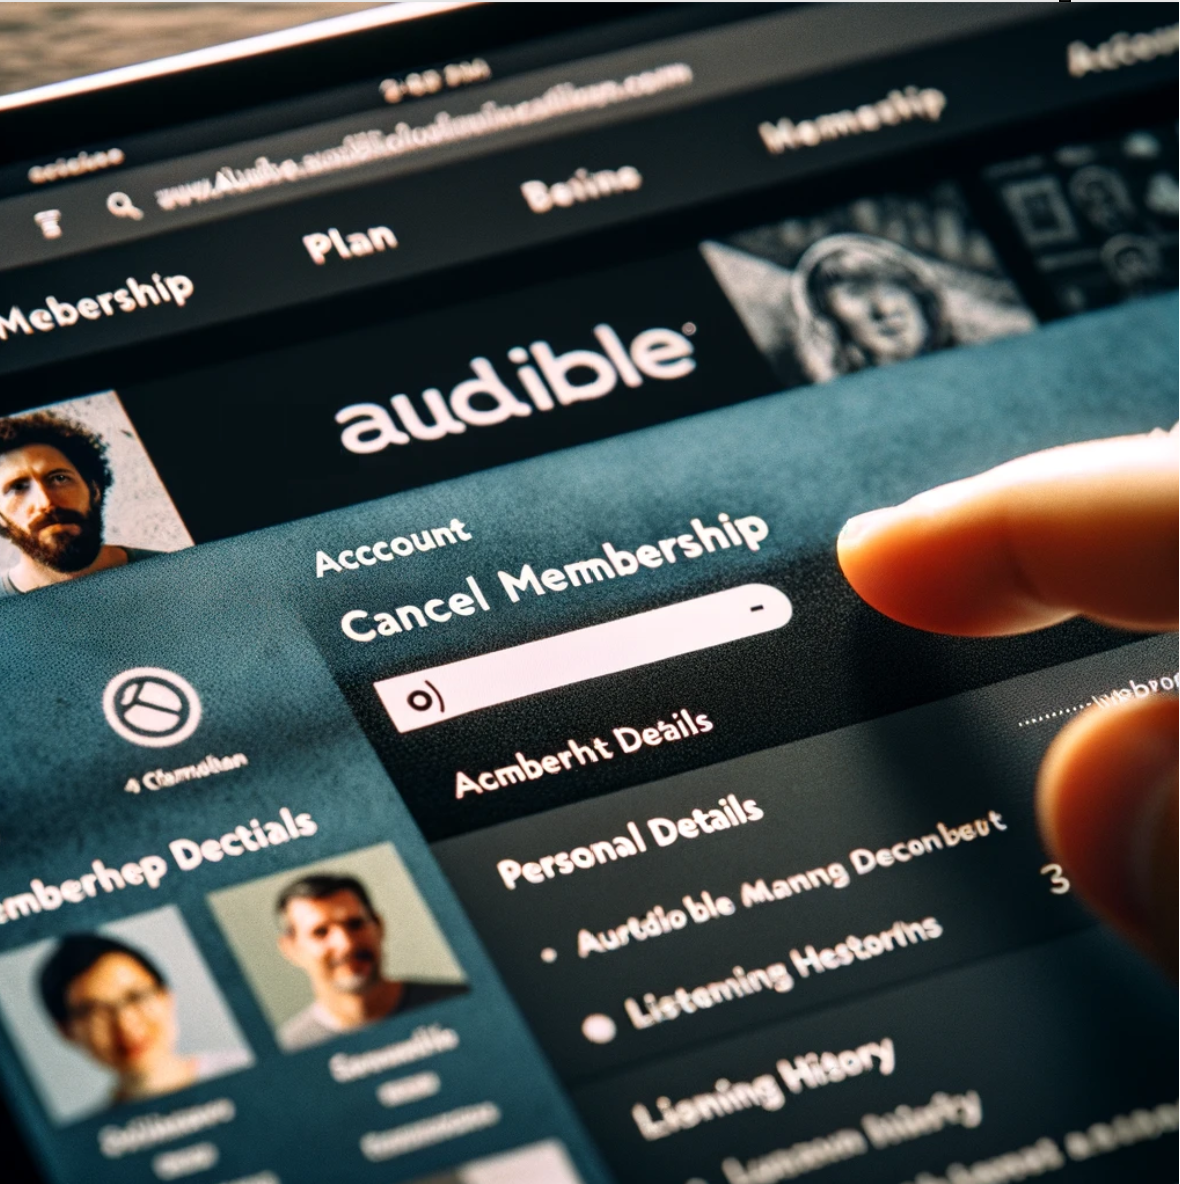 Audible website account details section with cancel membership link